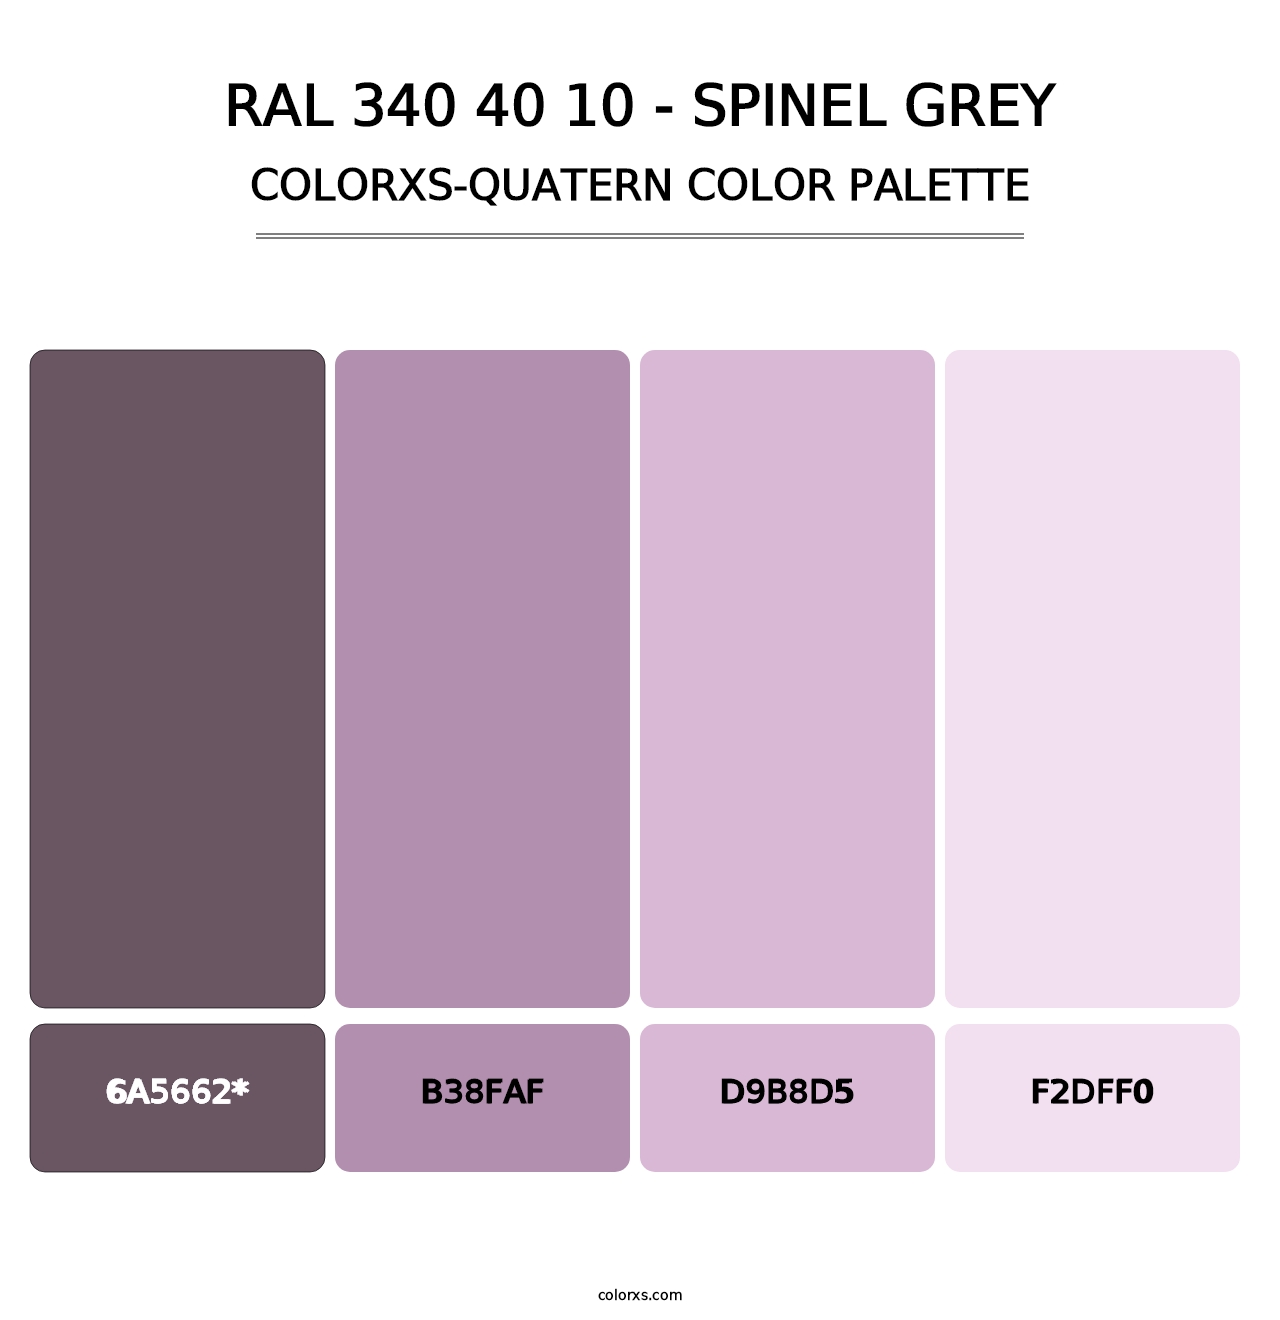 RAL 340 40 10 - Spinel Grey - Colorxs Quatern Palette